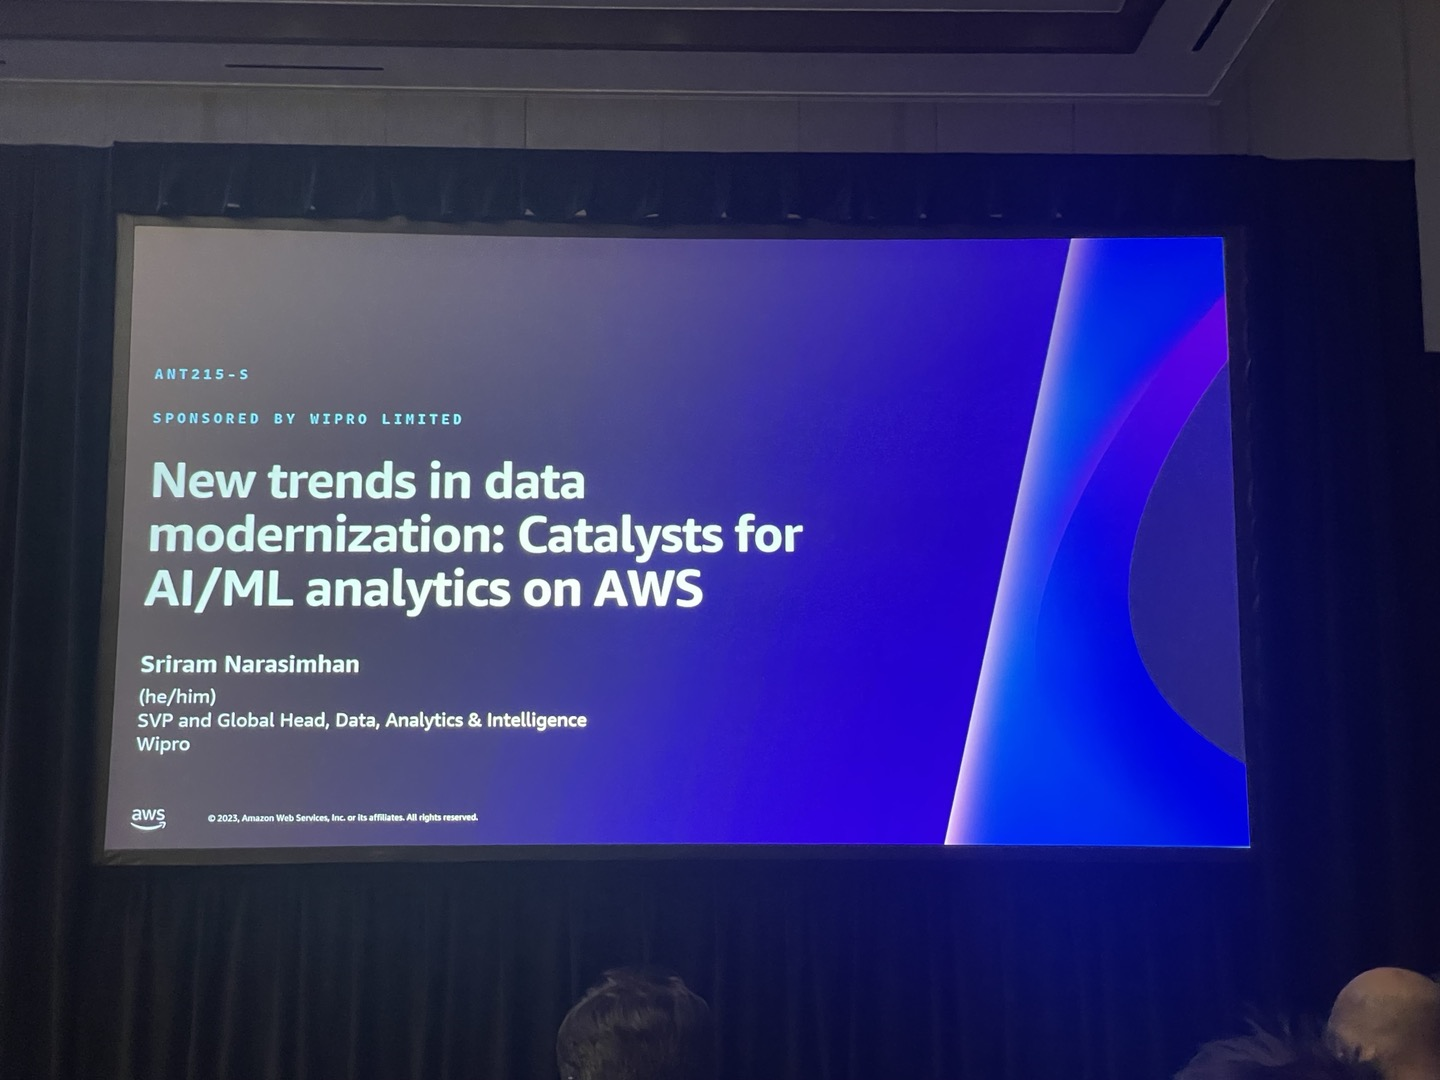 New trends in data modernization：Catalysts for AI/ML analytics on AWS (sponsored by Wipro Limited)